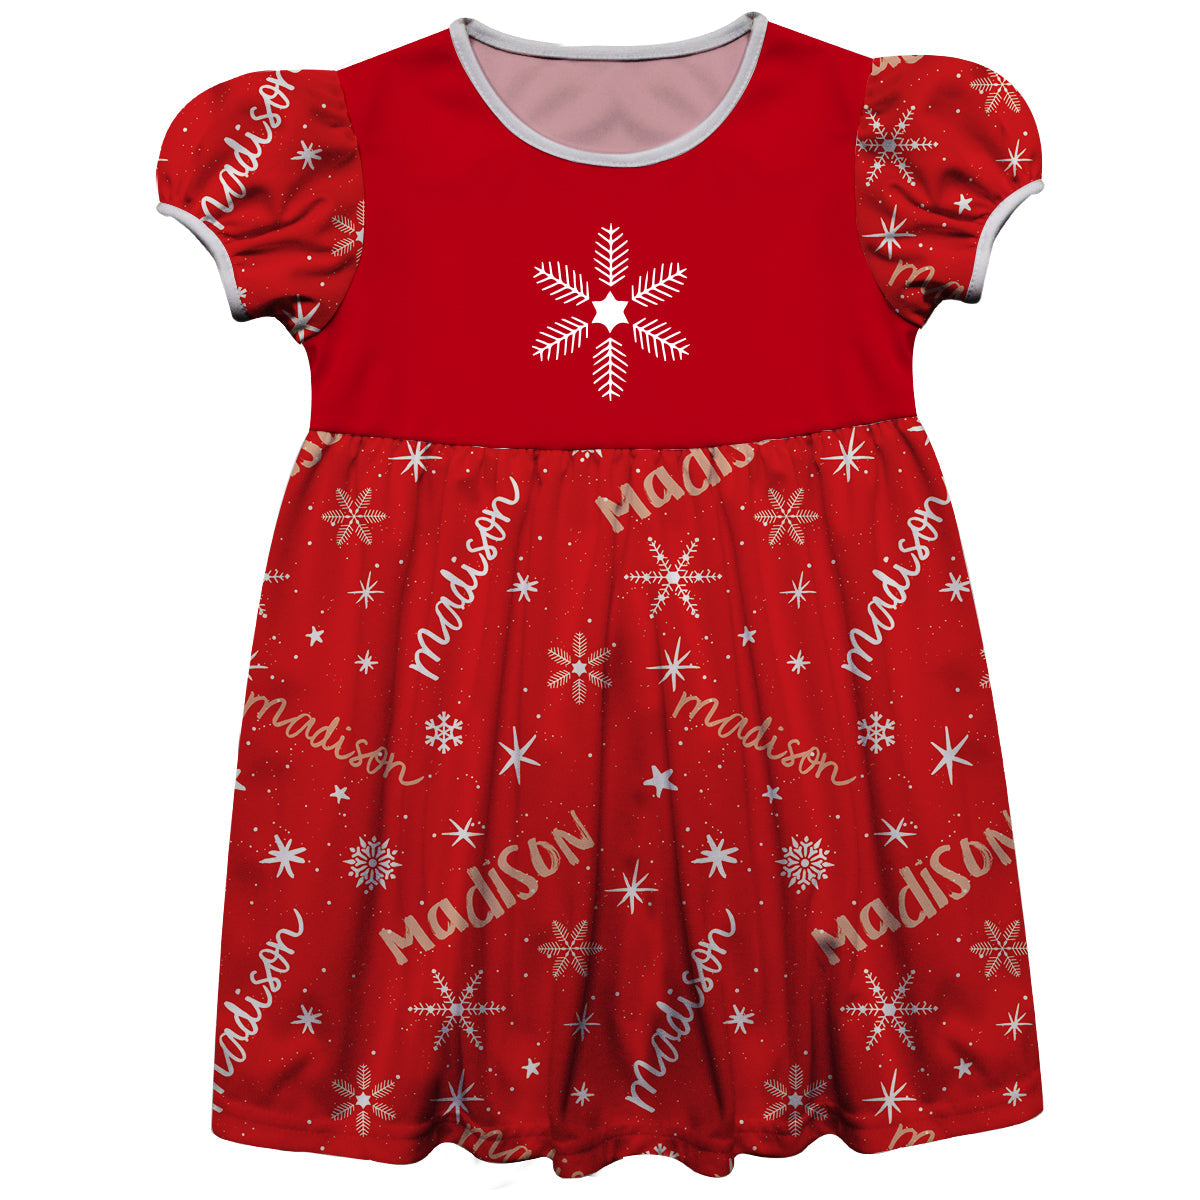 Girls red and white snowflakes dress with name - Wimziy&Co.